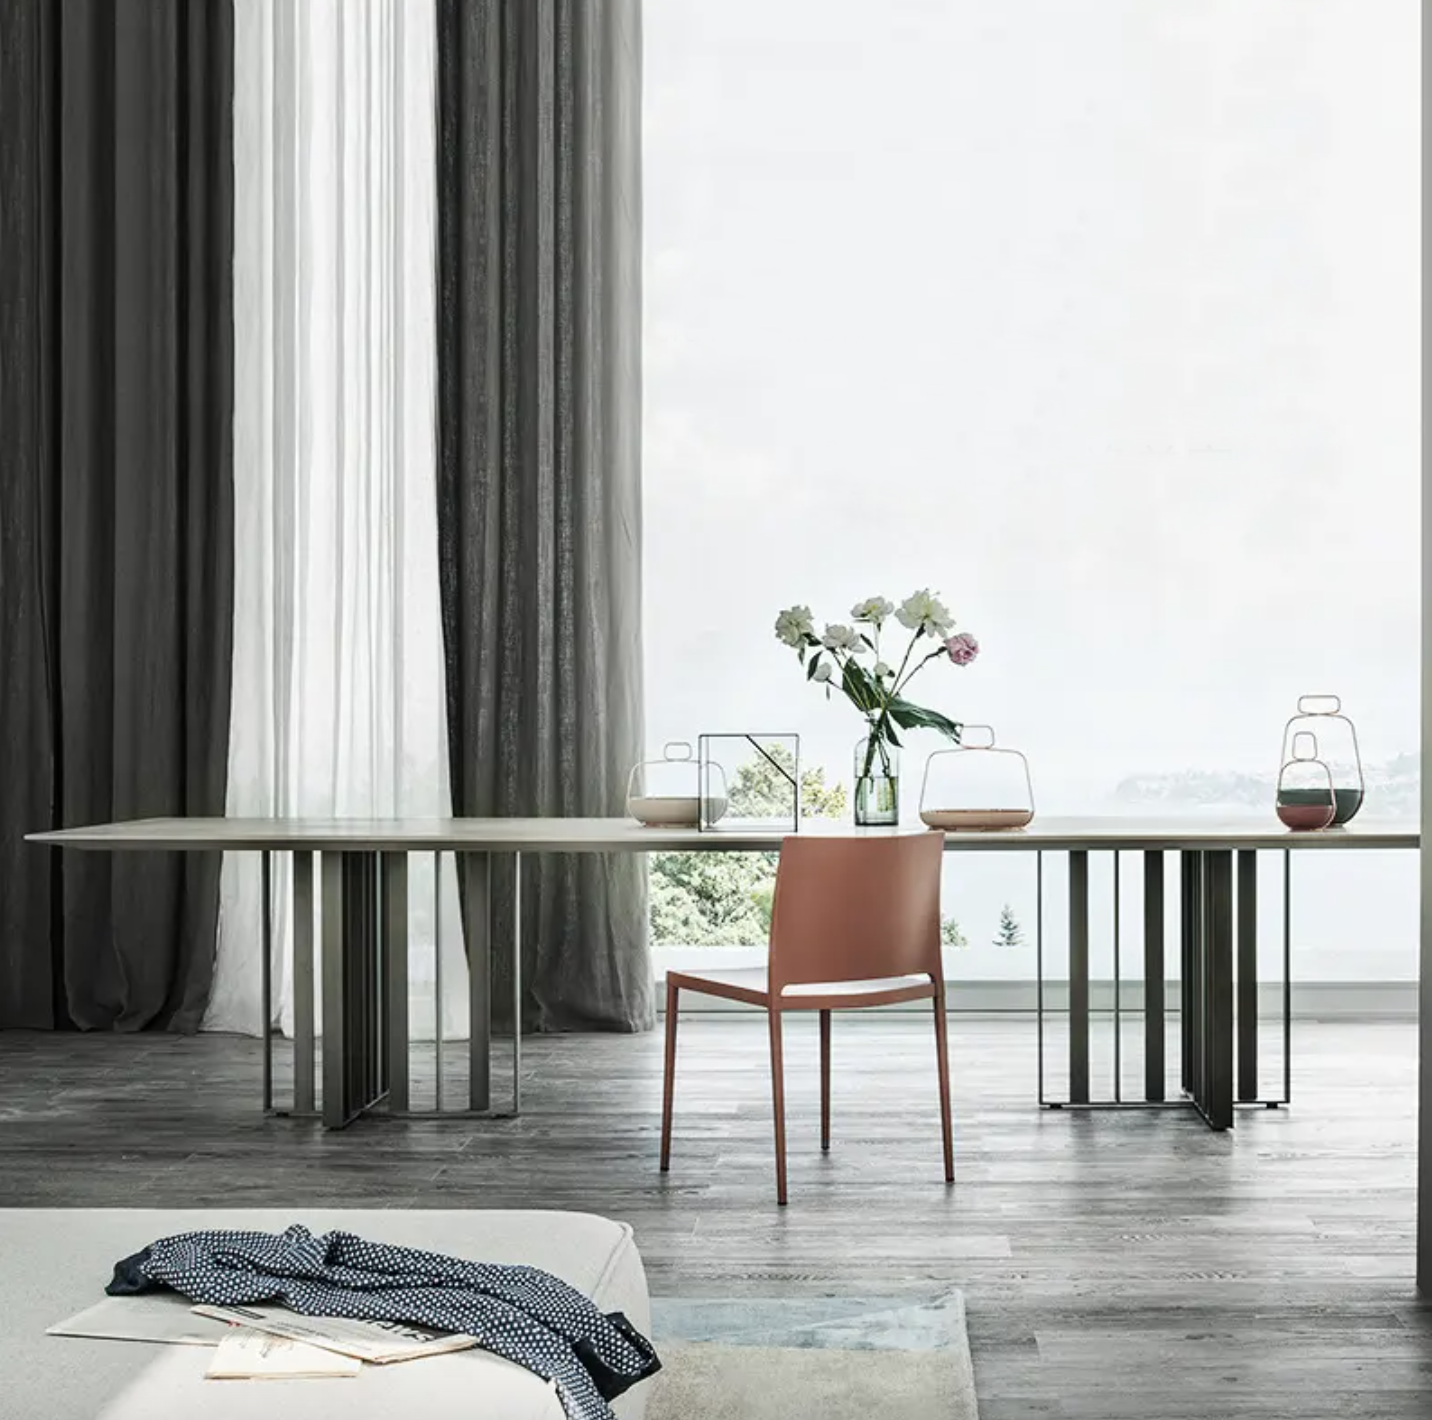 Odelia Dining Table